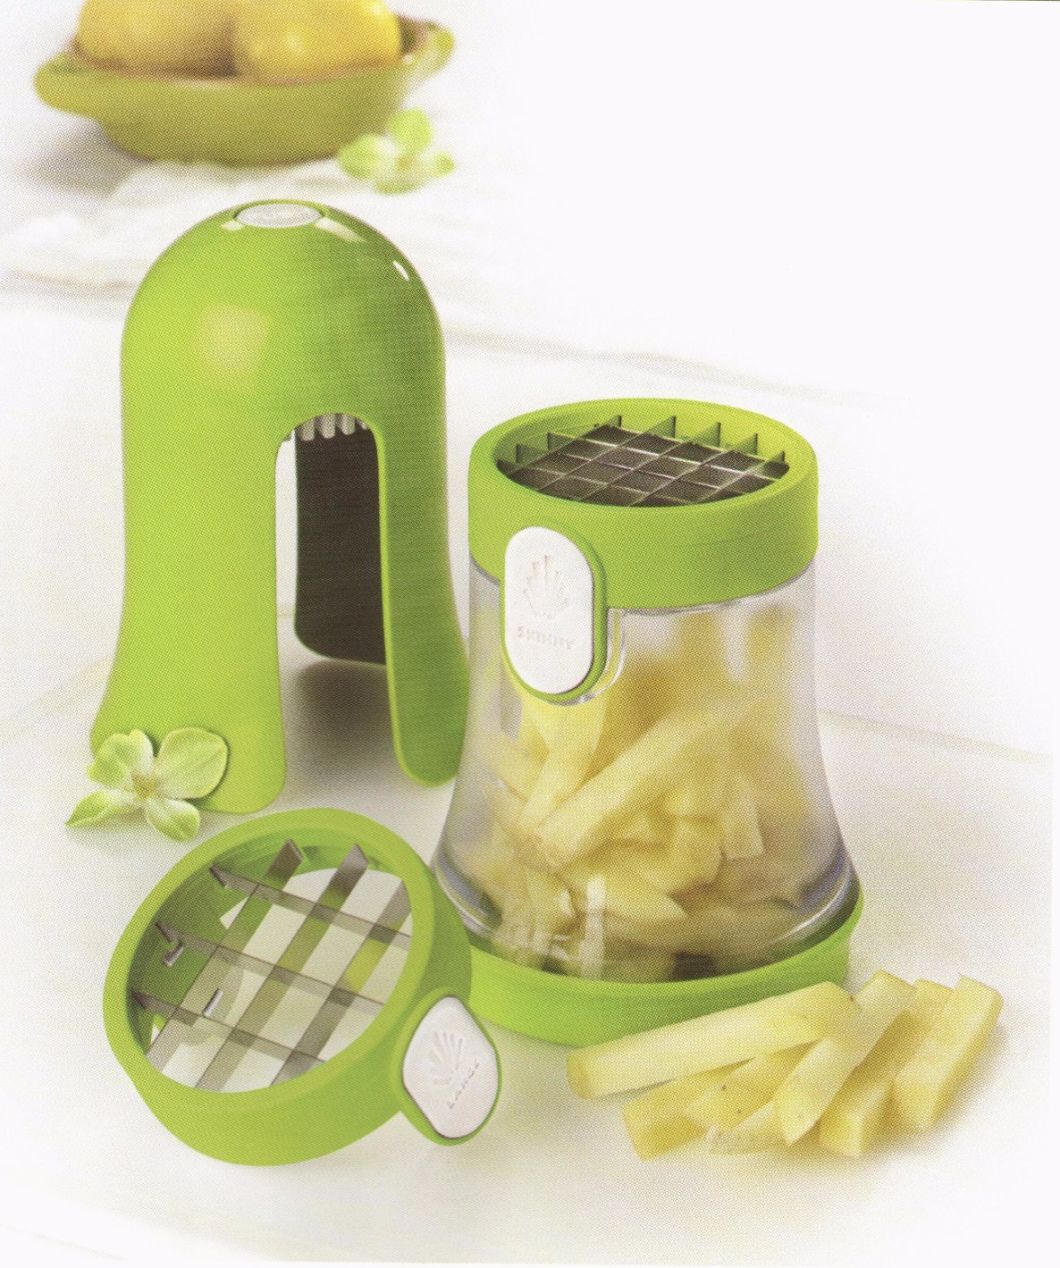 2 in 1 Home Appliance Plastic Food Chopper Vegetable Cutter Cg075